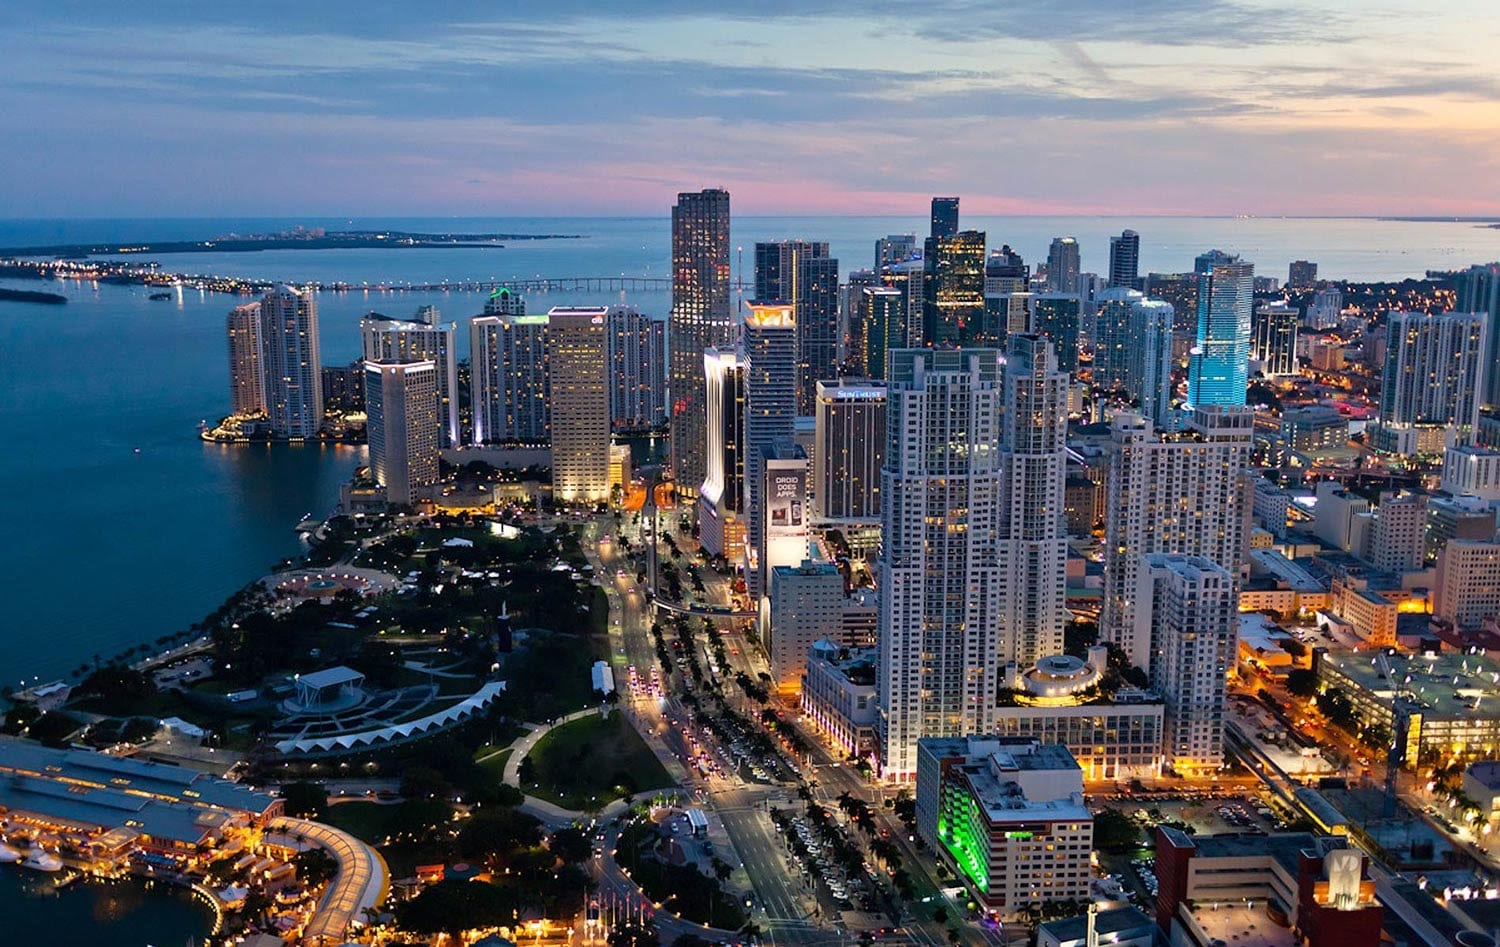 Miami: City is adding close to 7,000 new apartments in 2019, more than any other city in the U.S.